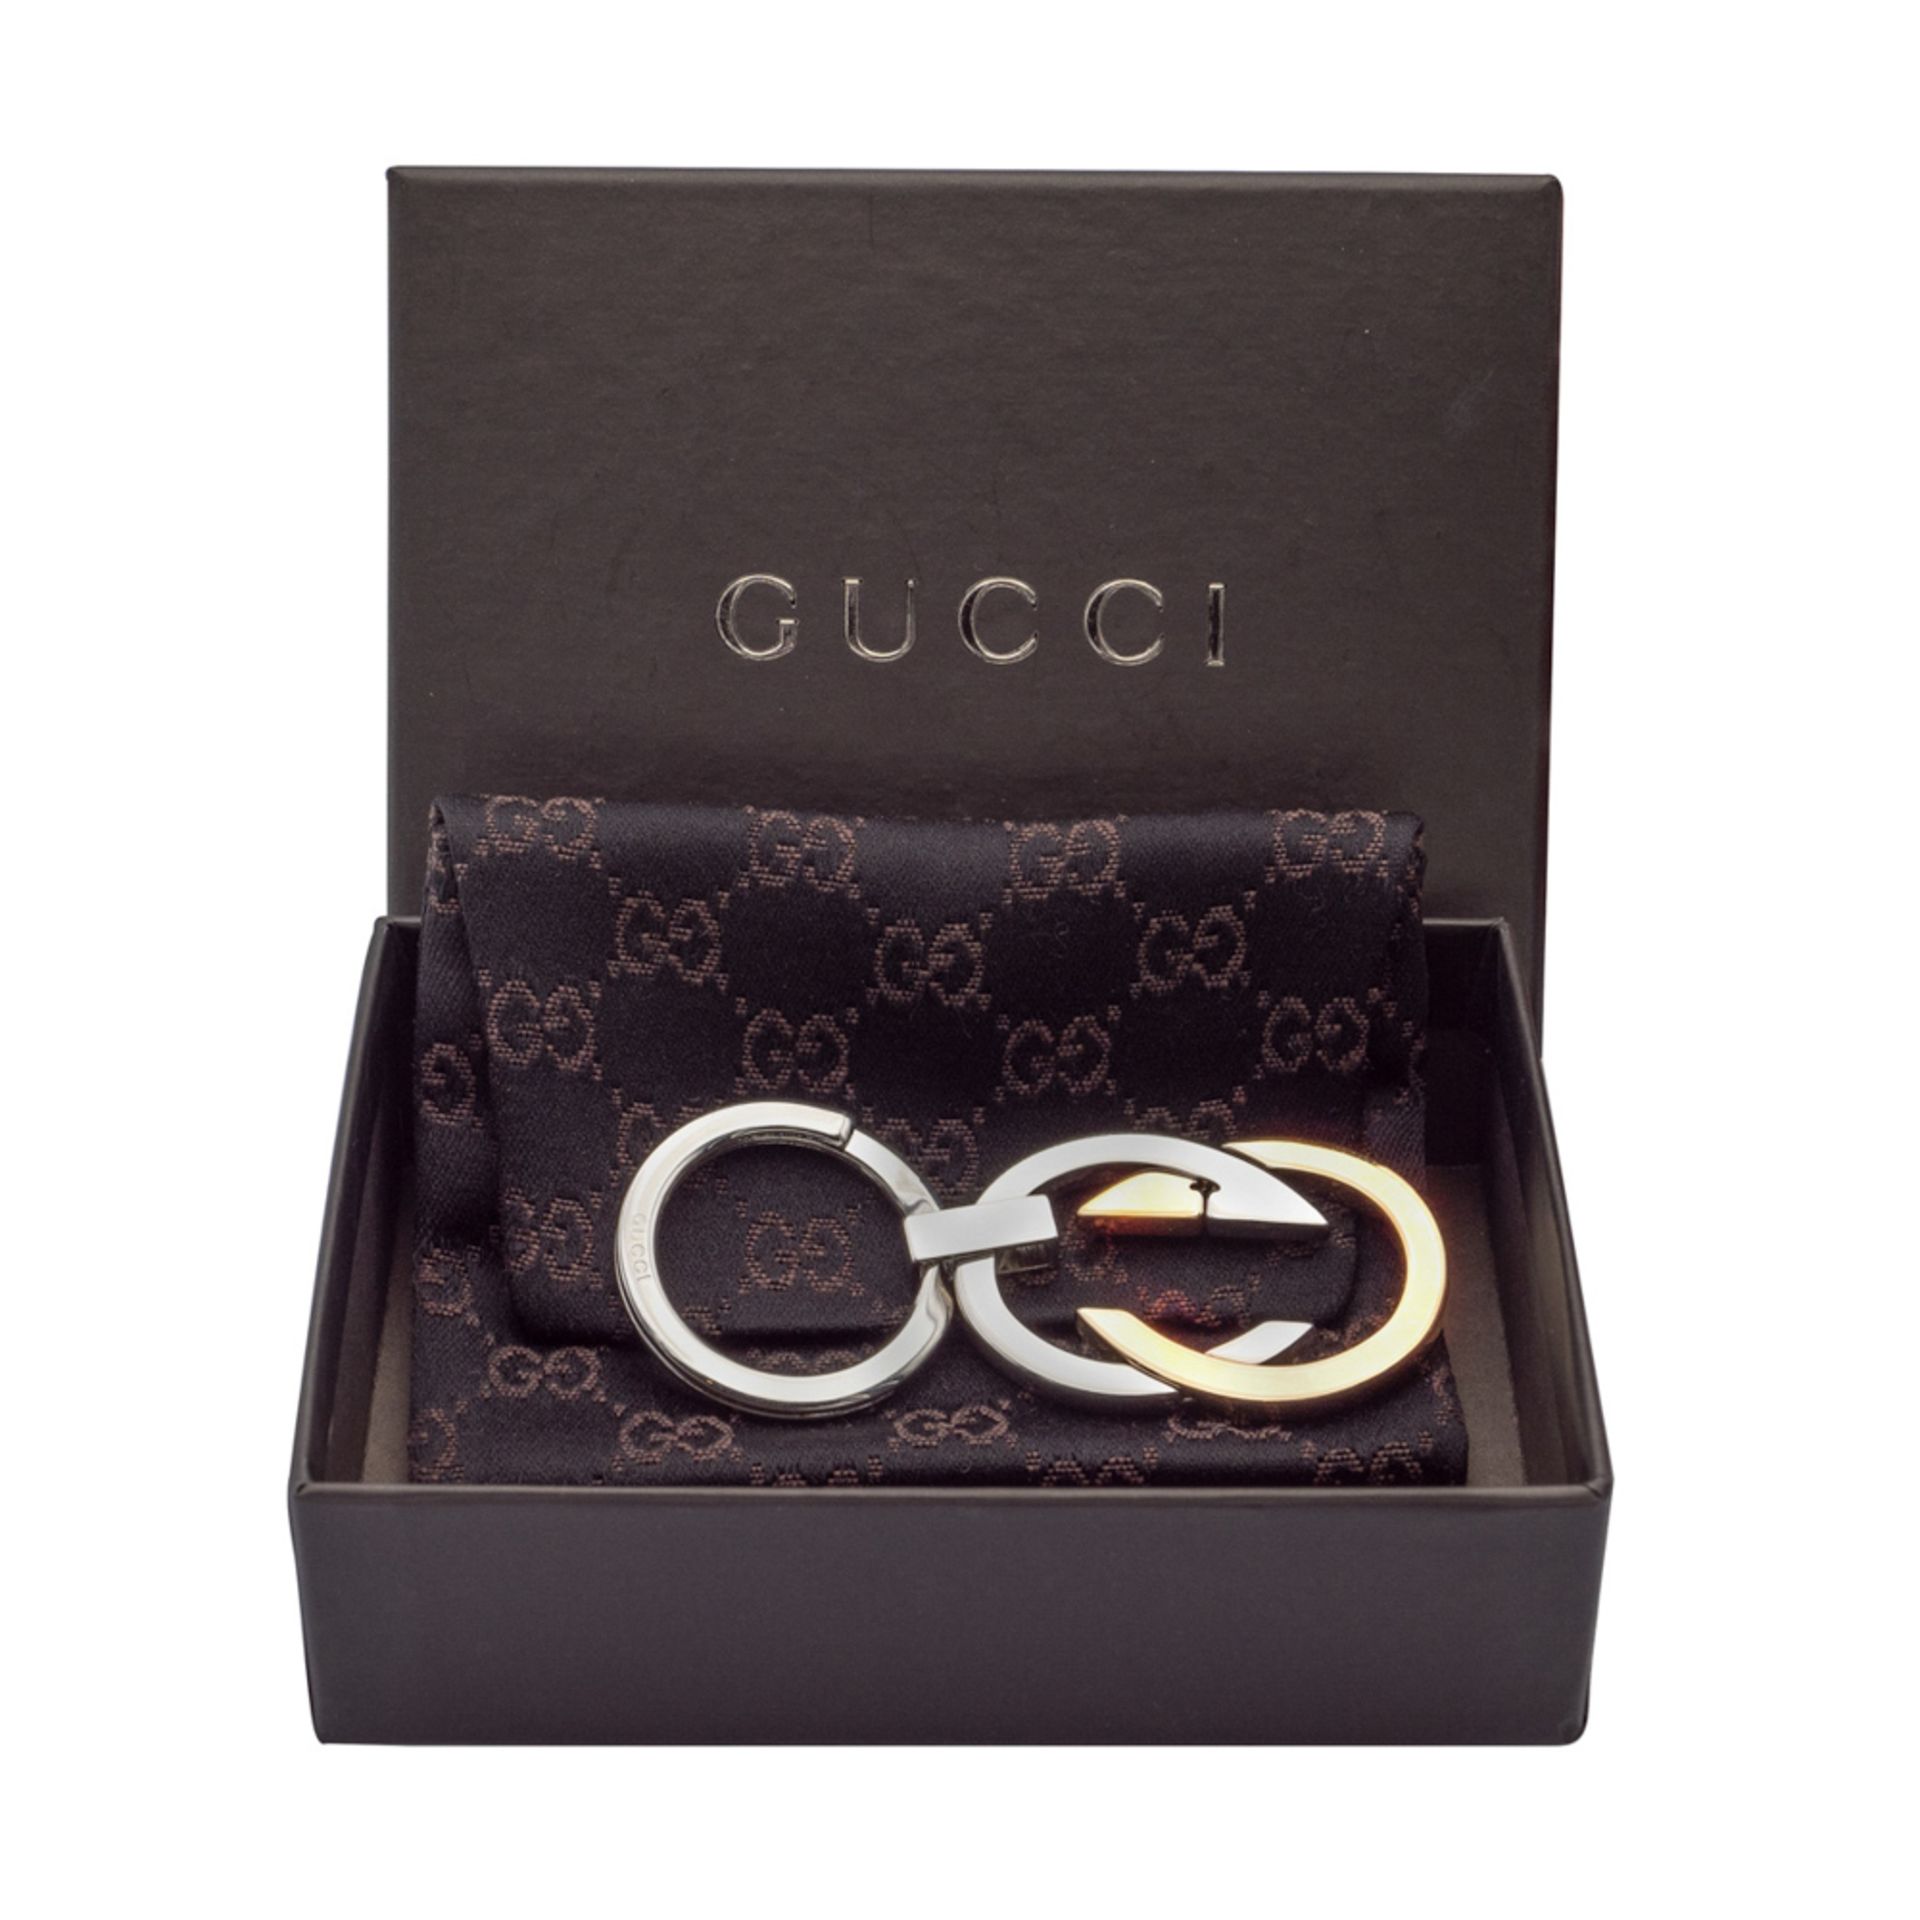 Gucci Doppia G collection keyring diameter 2,5 cm. - Image 2 of 2